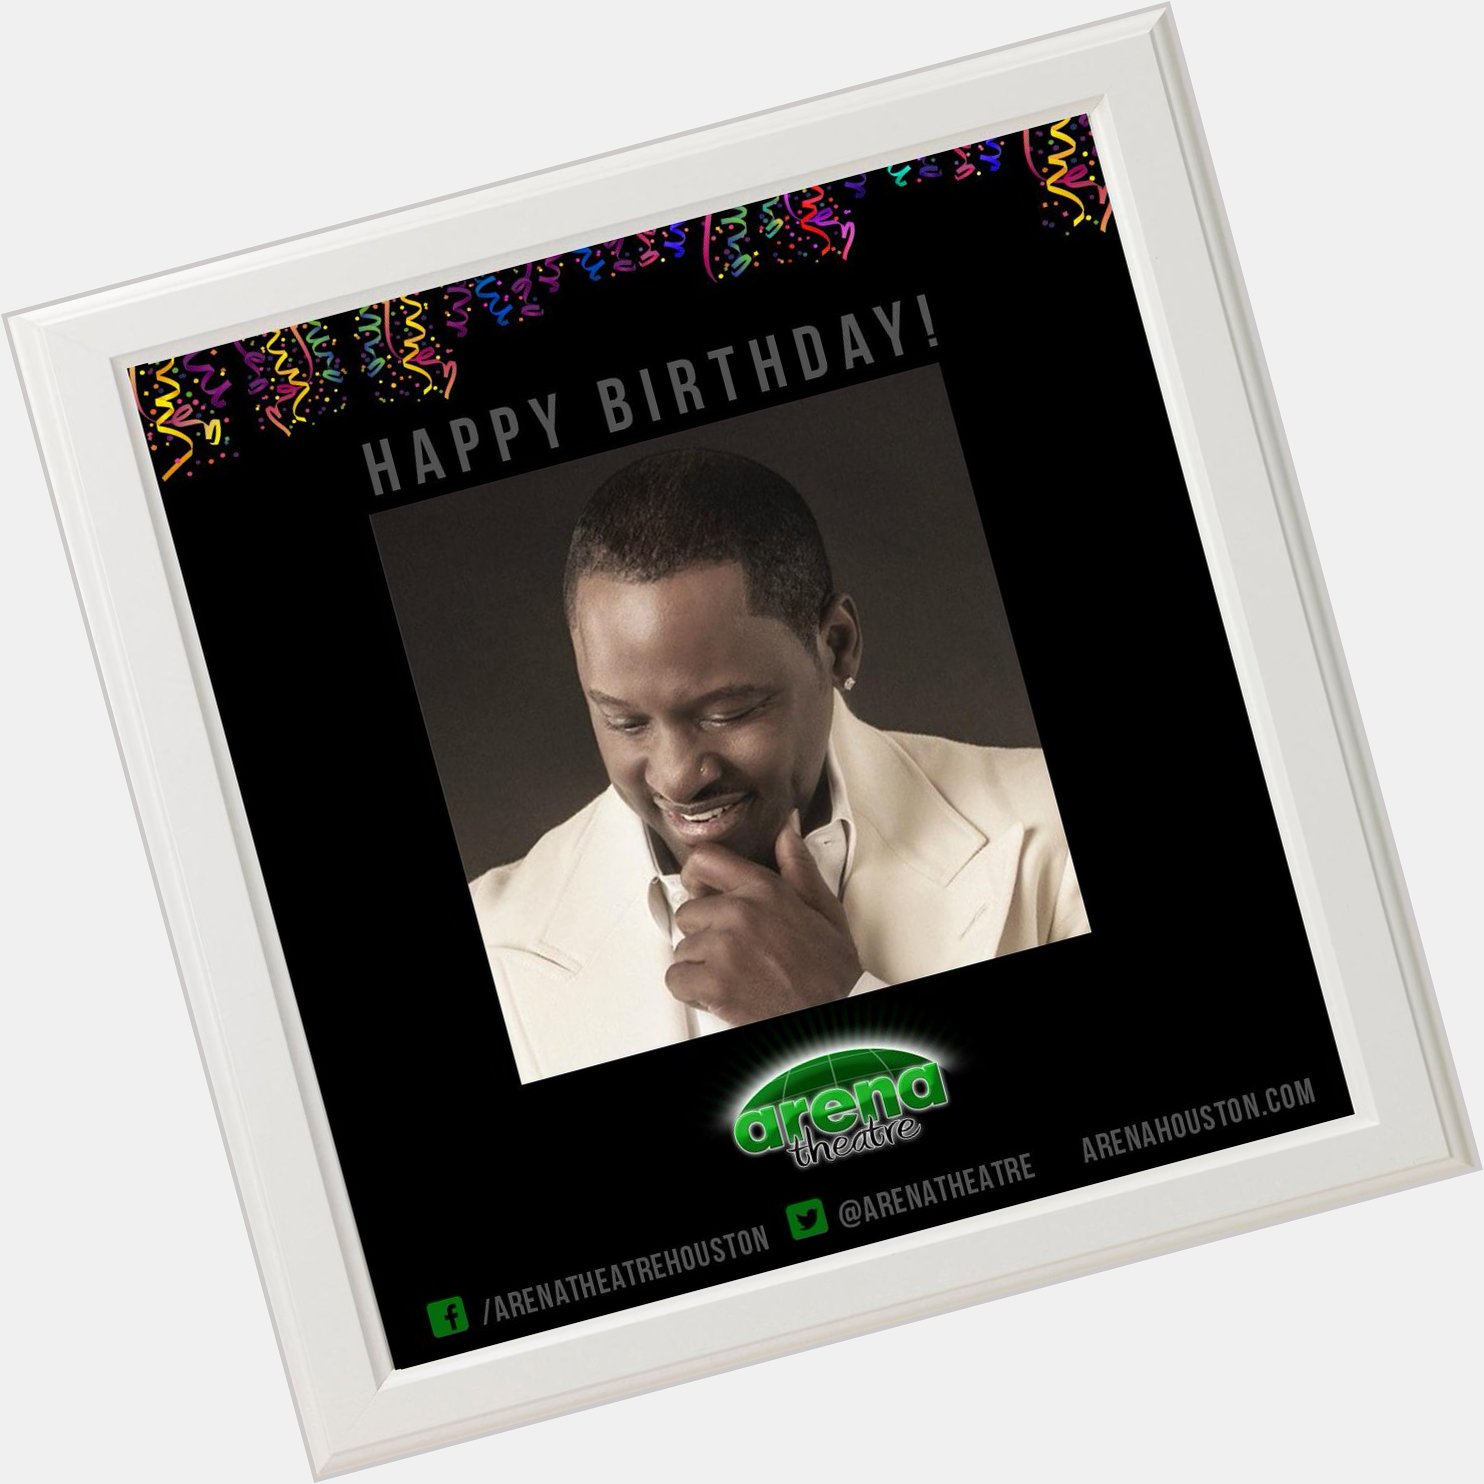 Happy Birthday Johnny Gill! Best wishes on this day for you! 